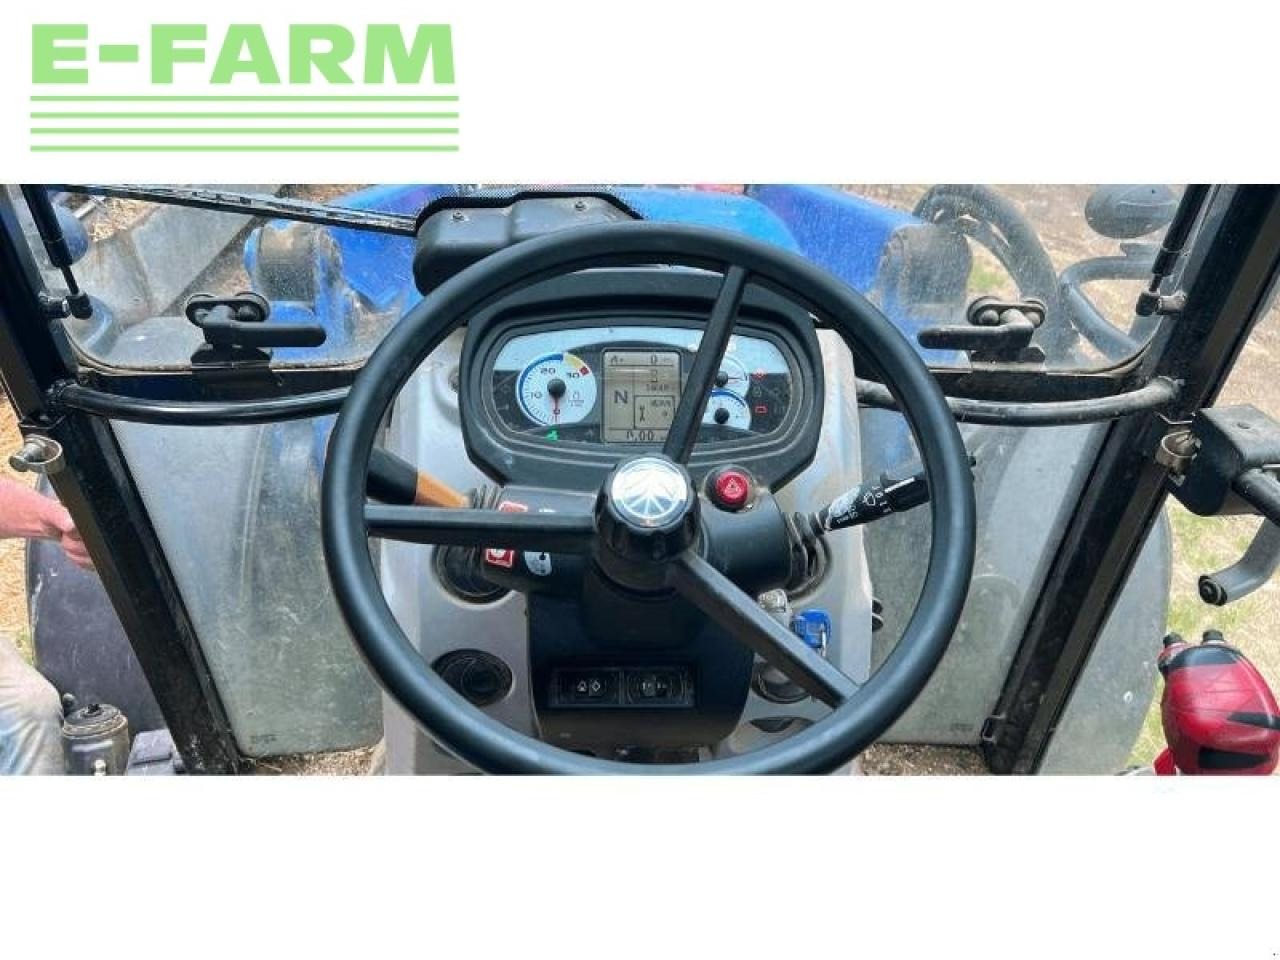 Farm tractor New Holland t5.95: picture 3